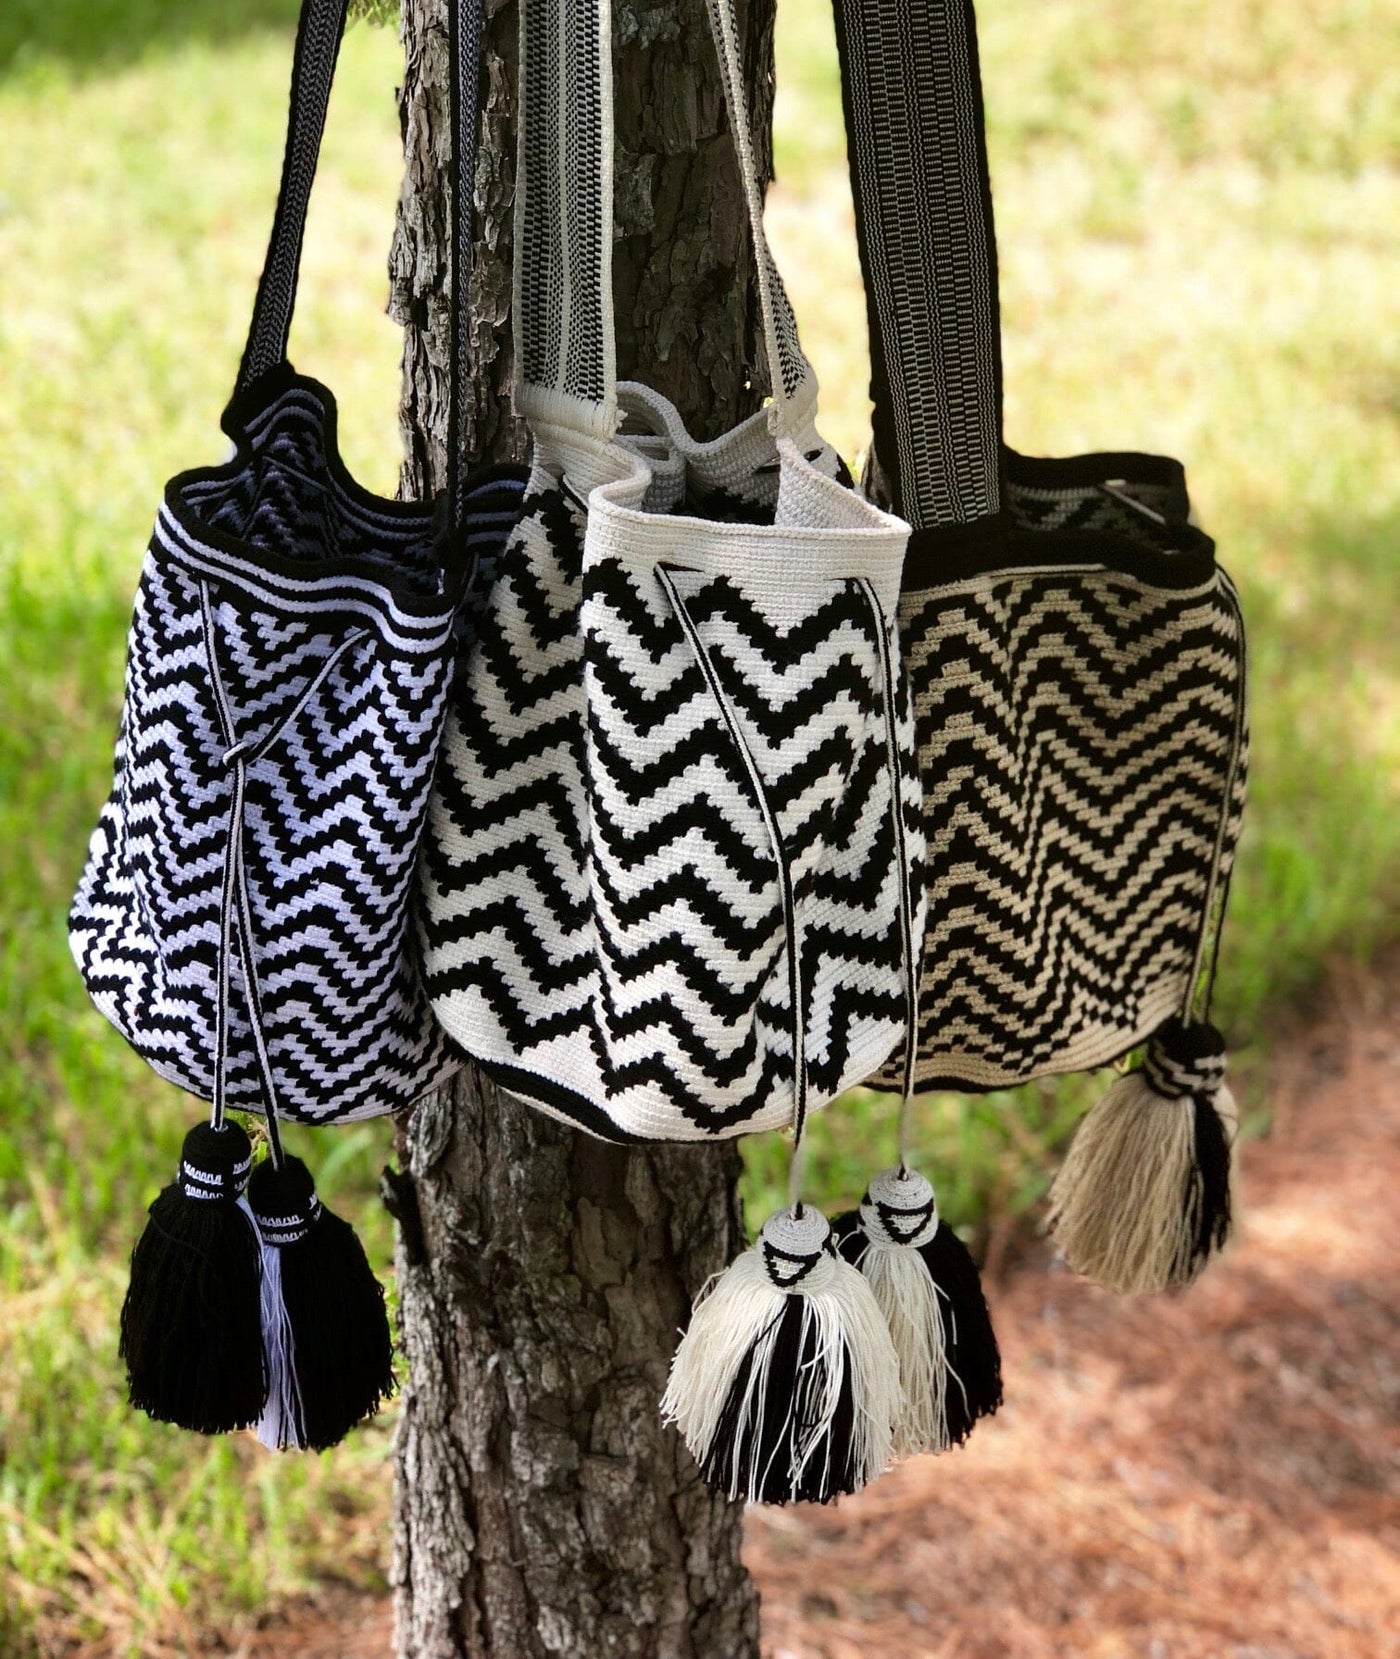 Black and White Crochet Bags